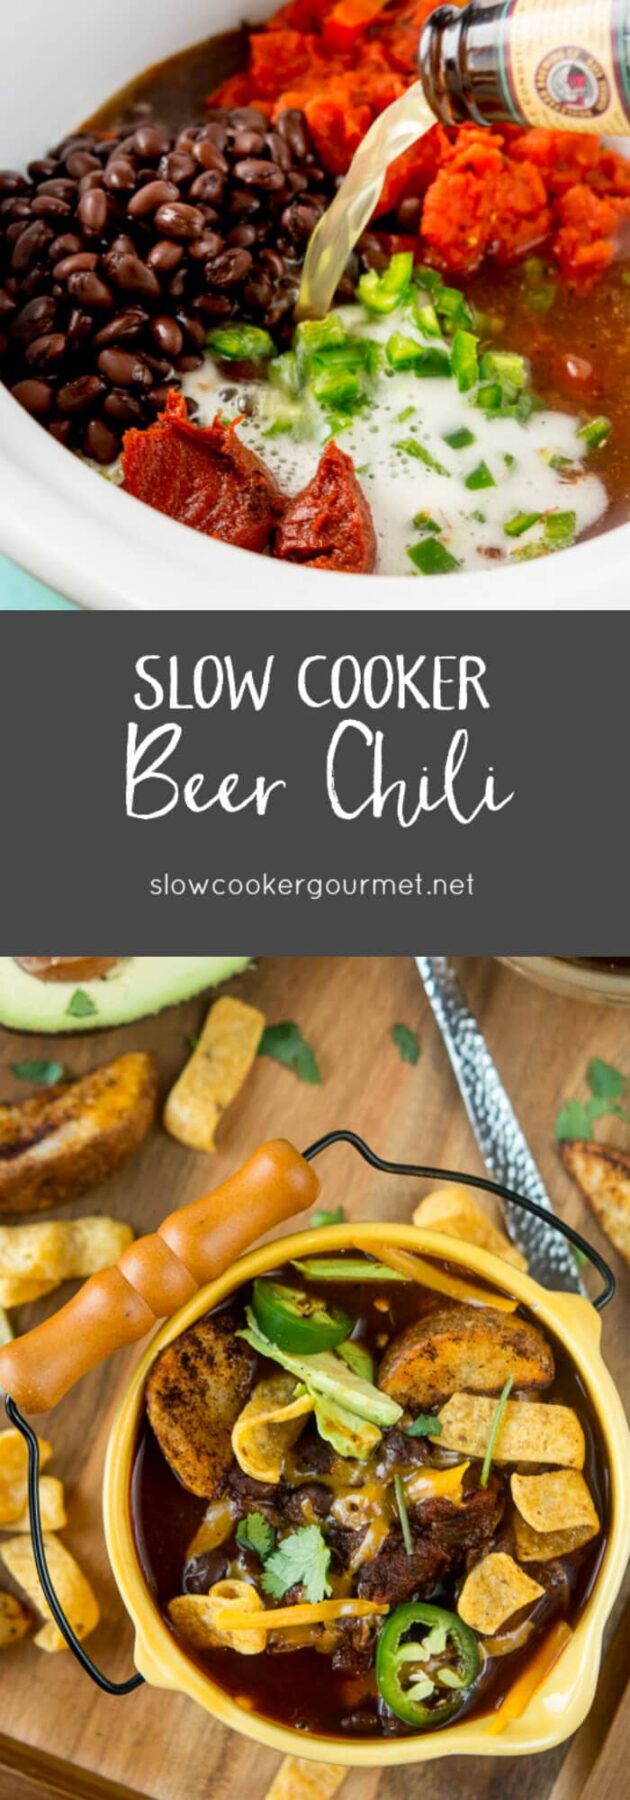 Slow Cooker Beer Chili